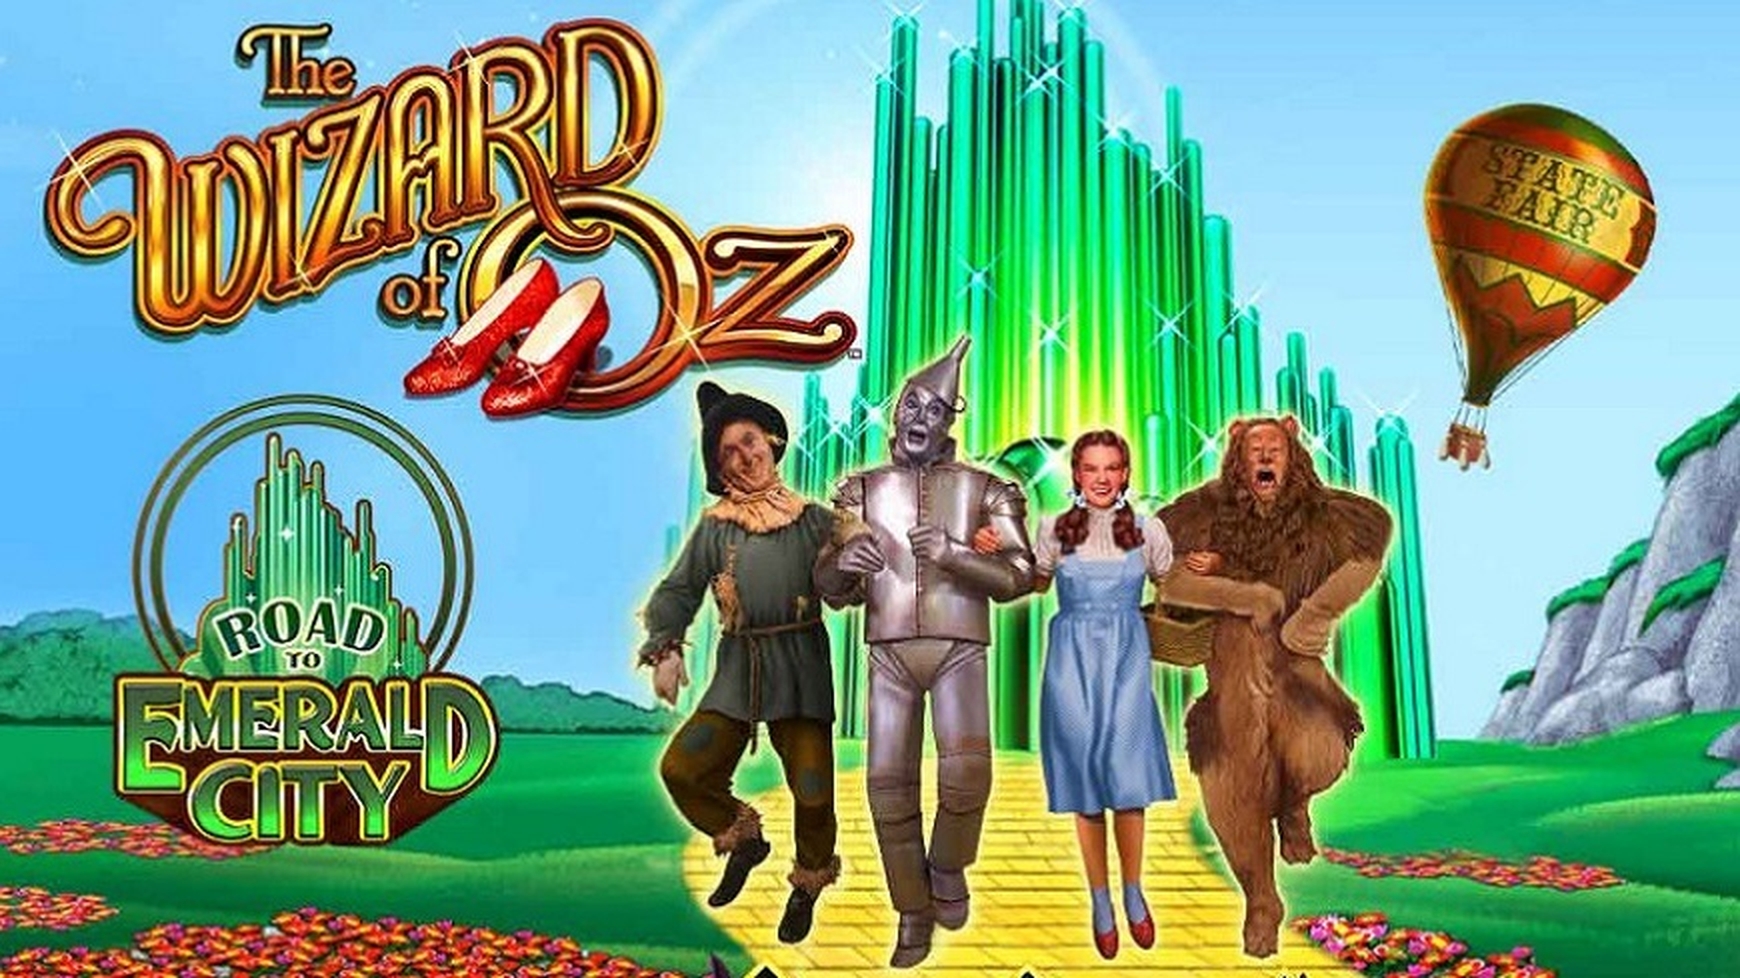 The Wizard of Oz demo